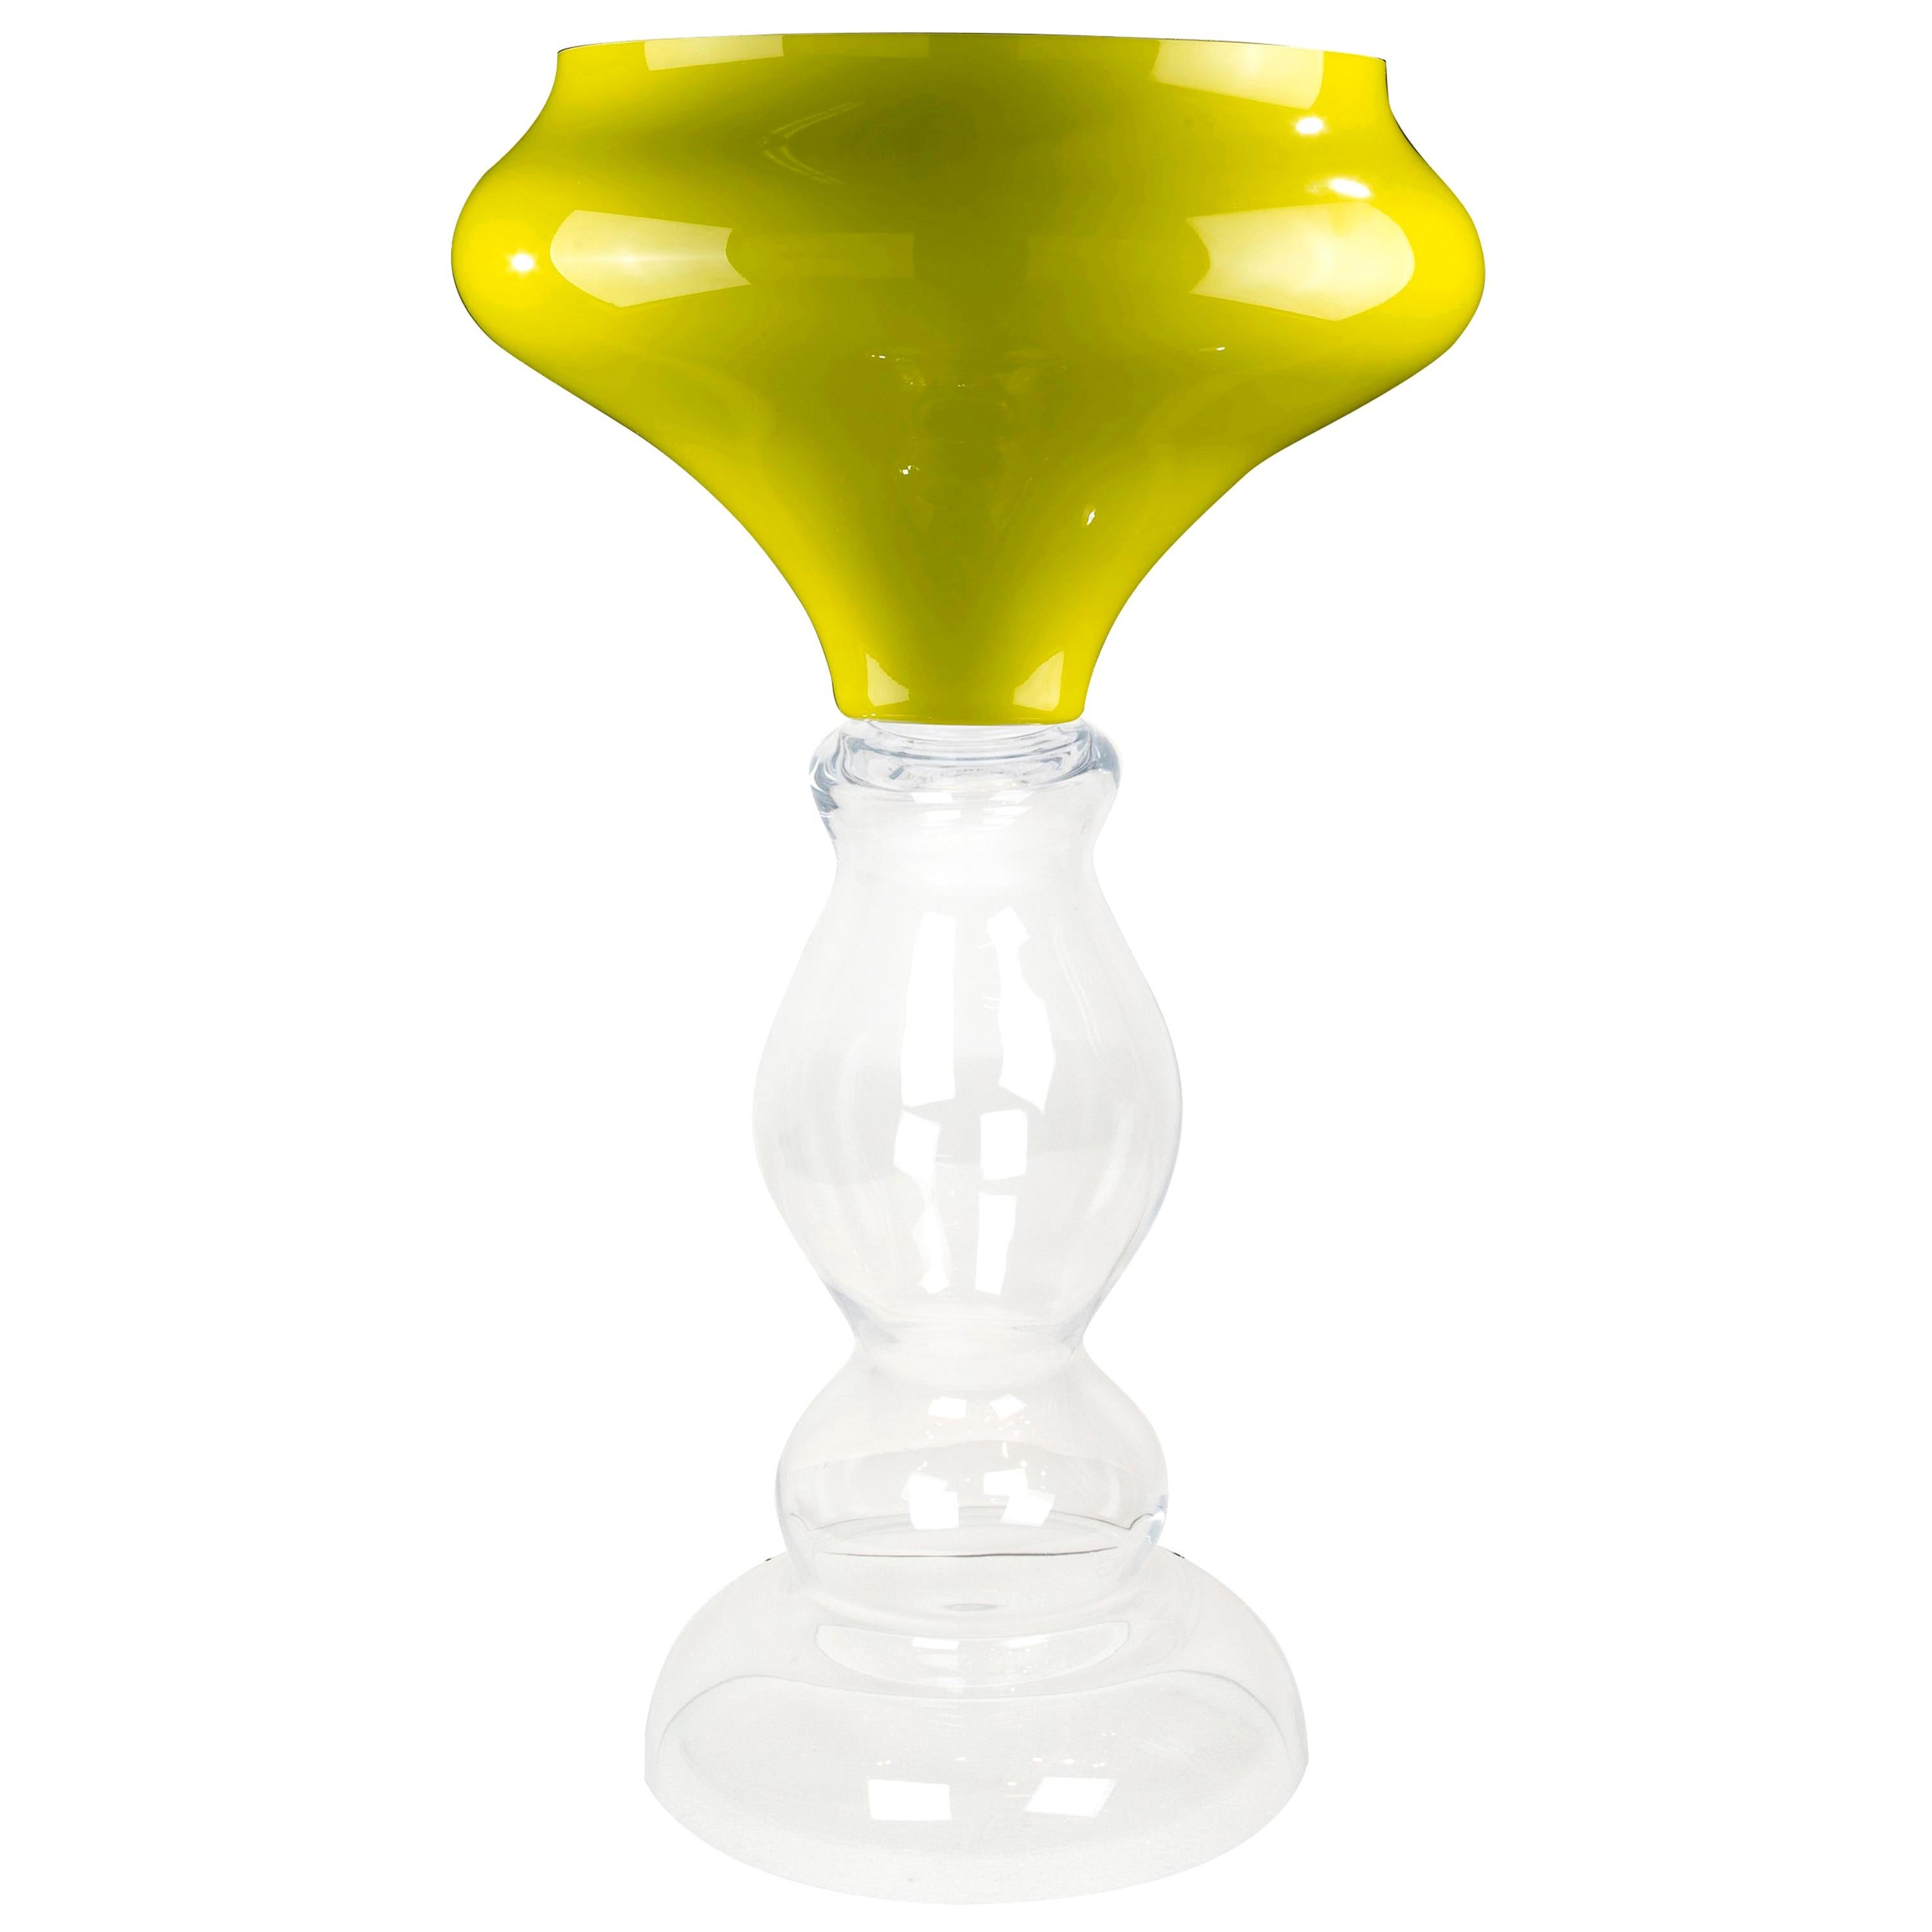 Vase Zeus, Apple Green and Clear Color, in Glass, Italy